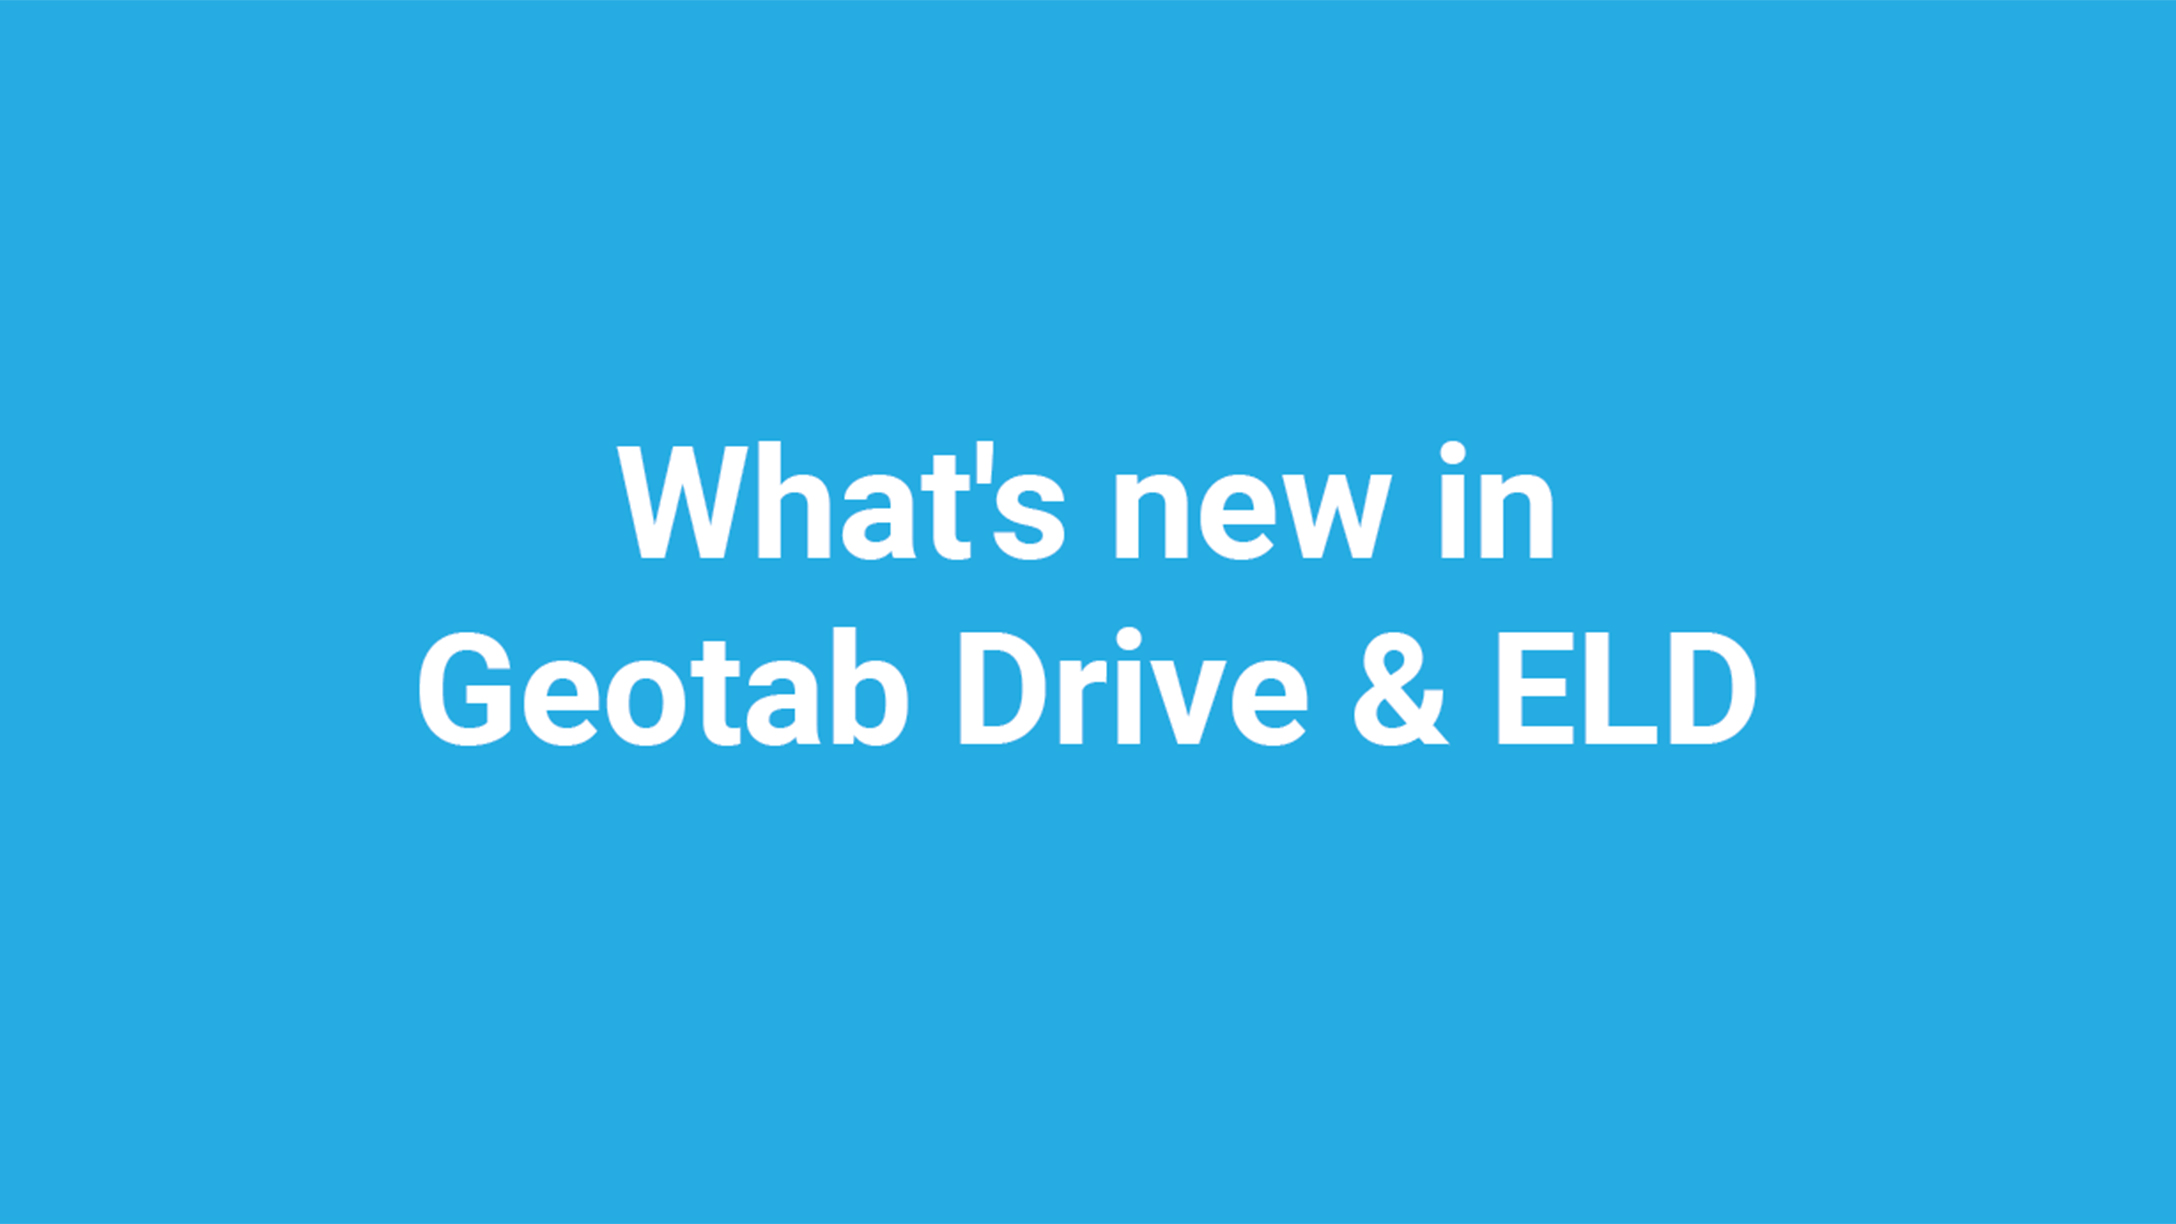 "What’s New in Geotab Drive & ELD" in white writing with a baby blue background